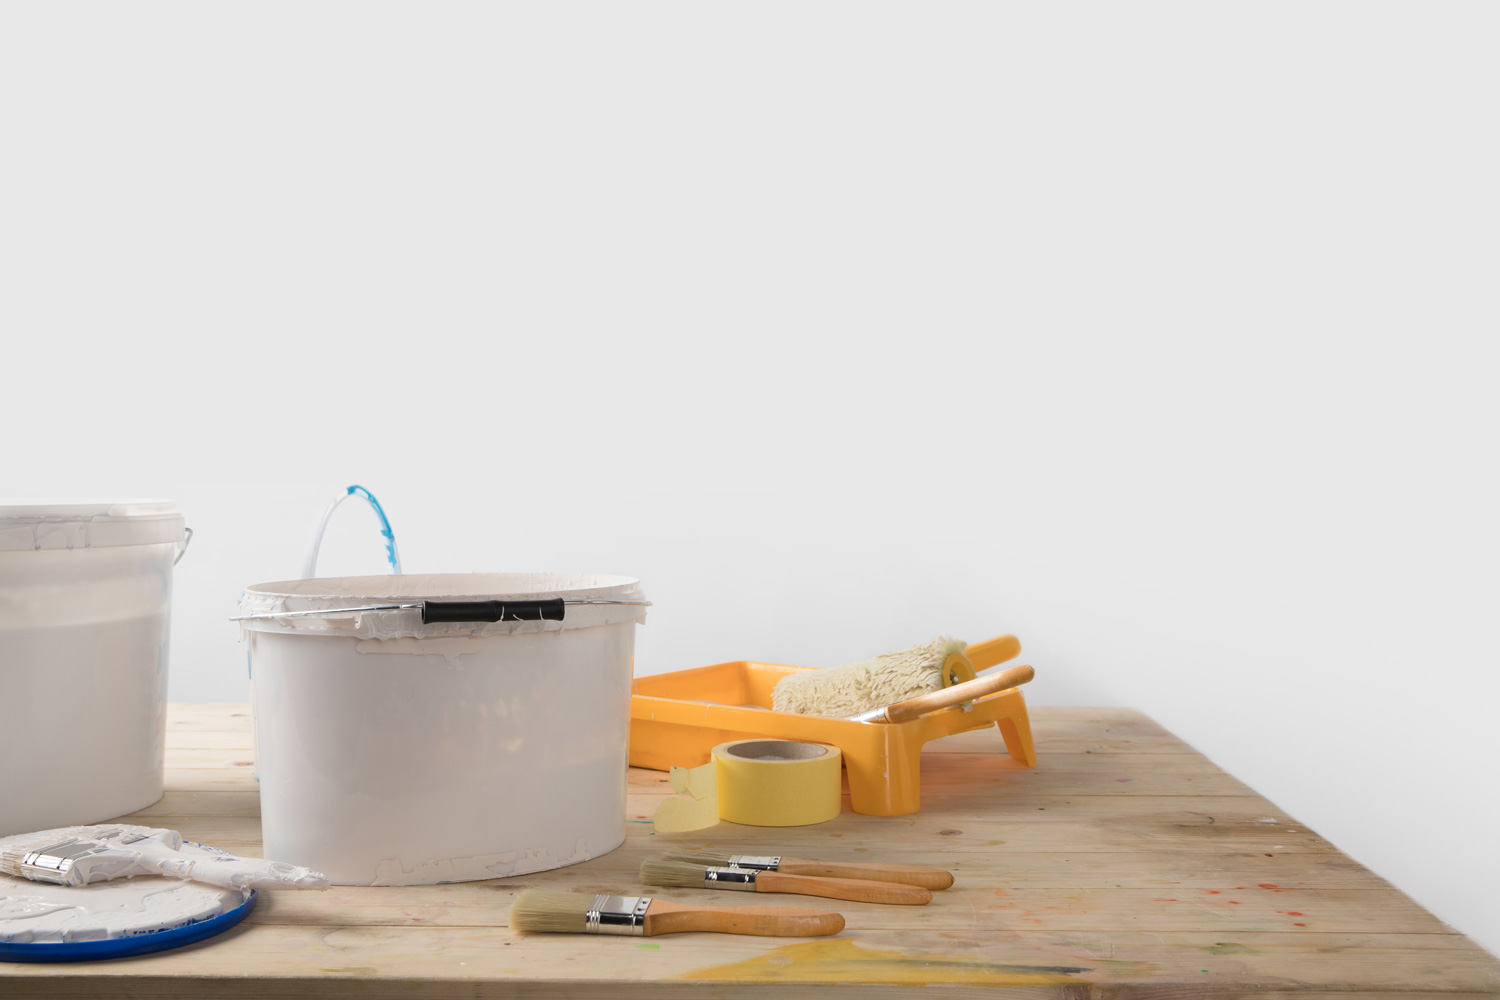 Buckets with paints and plastic tray on wooden table — Free Stock Image